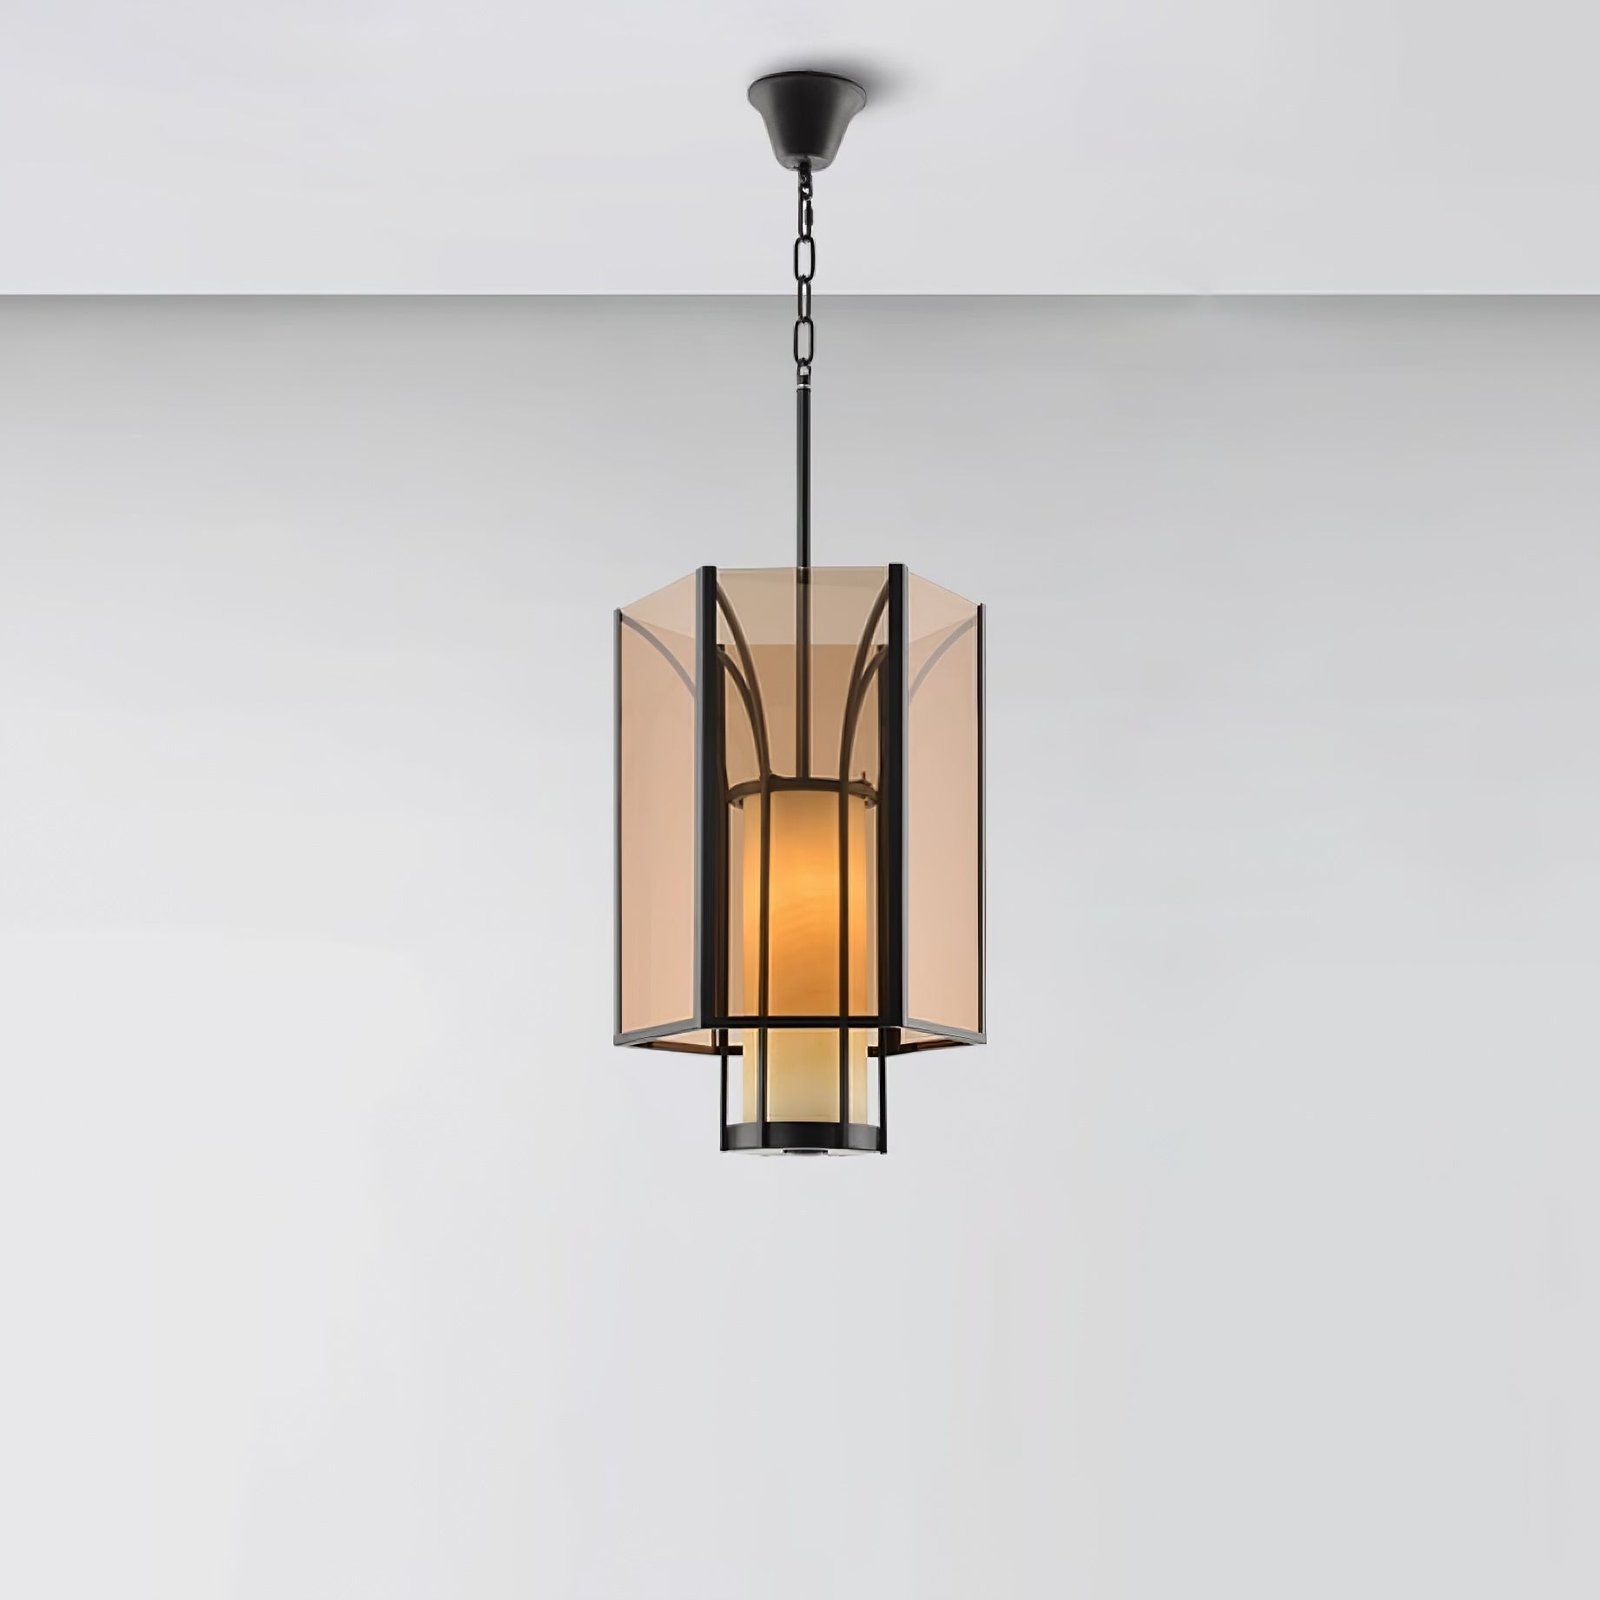 Black and amber Remy Pendant Lamp measuring 15.7 inches in diameter and 33.4 inches in height (40cm x 85cm).